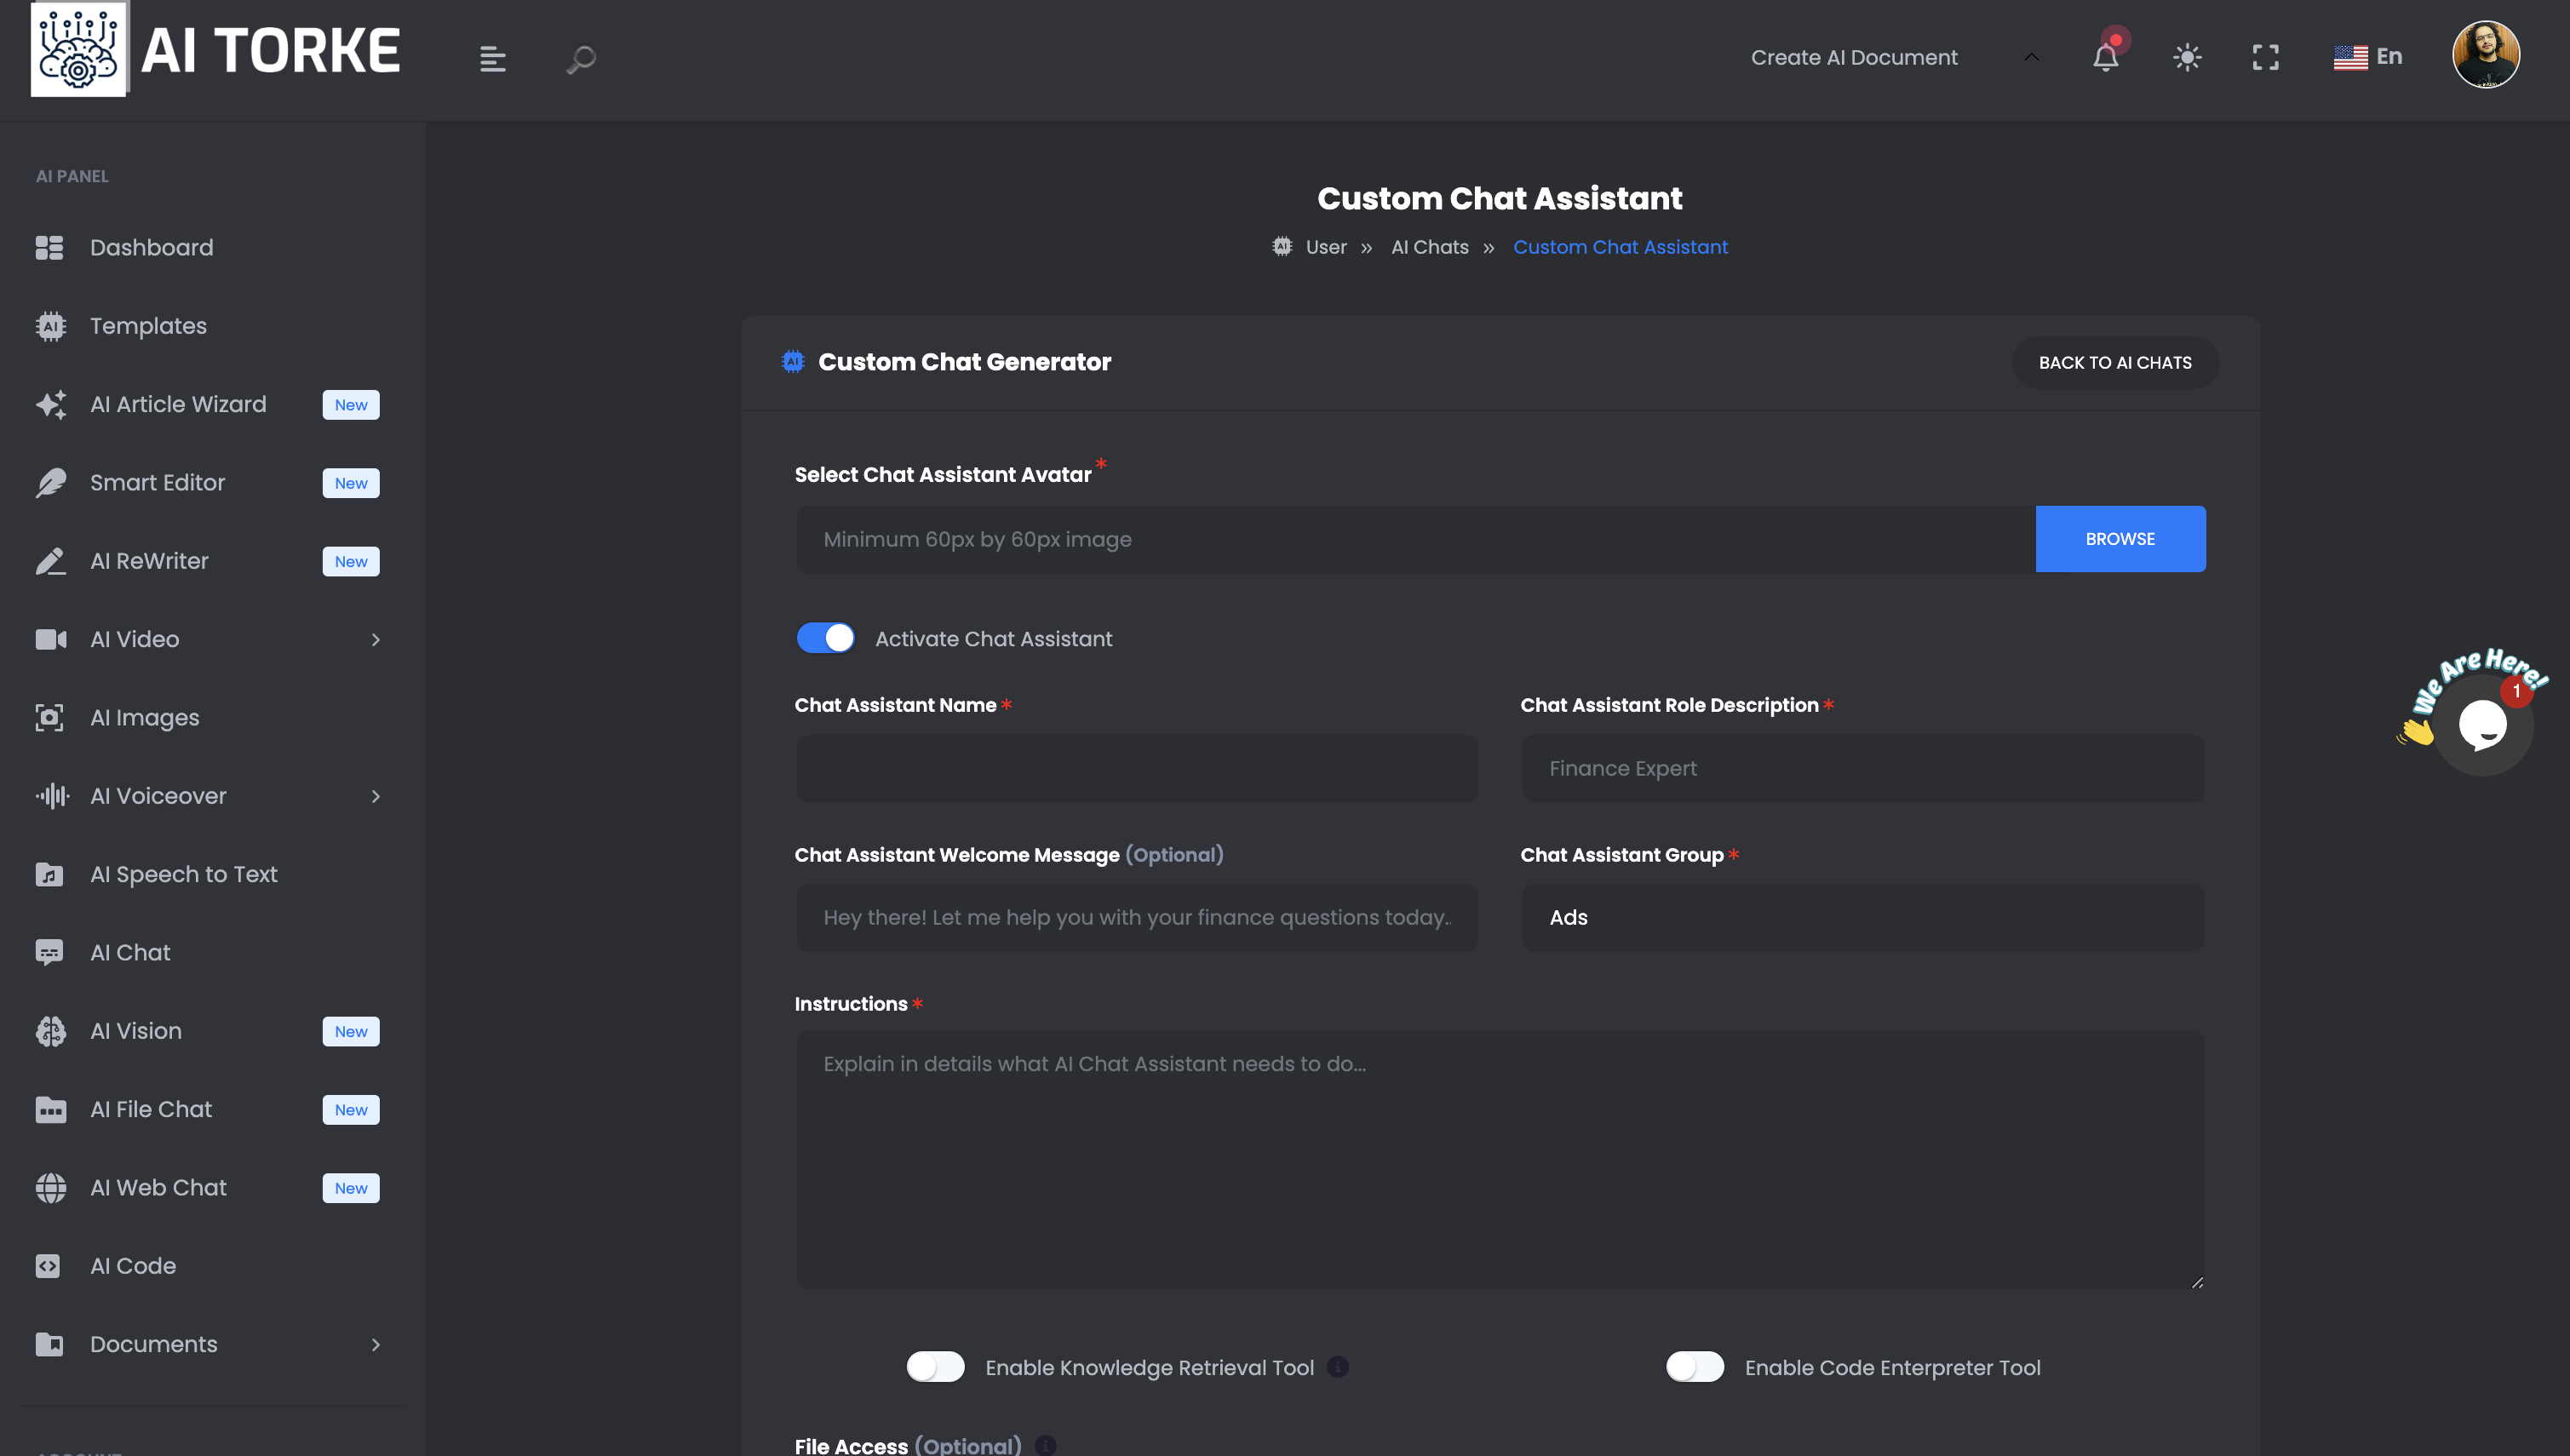 Build your custom chat assistant with AI Torke